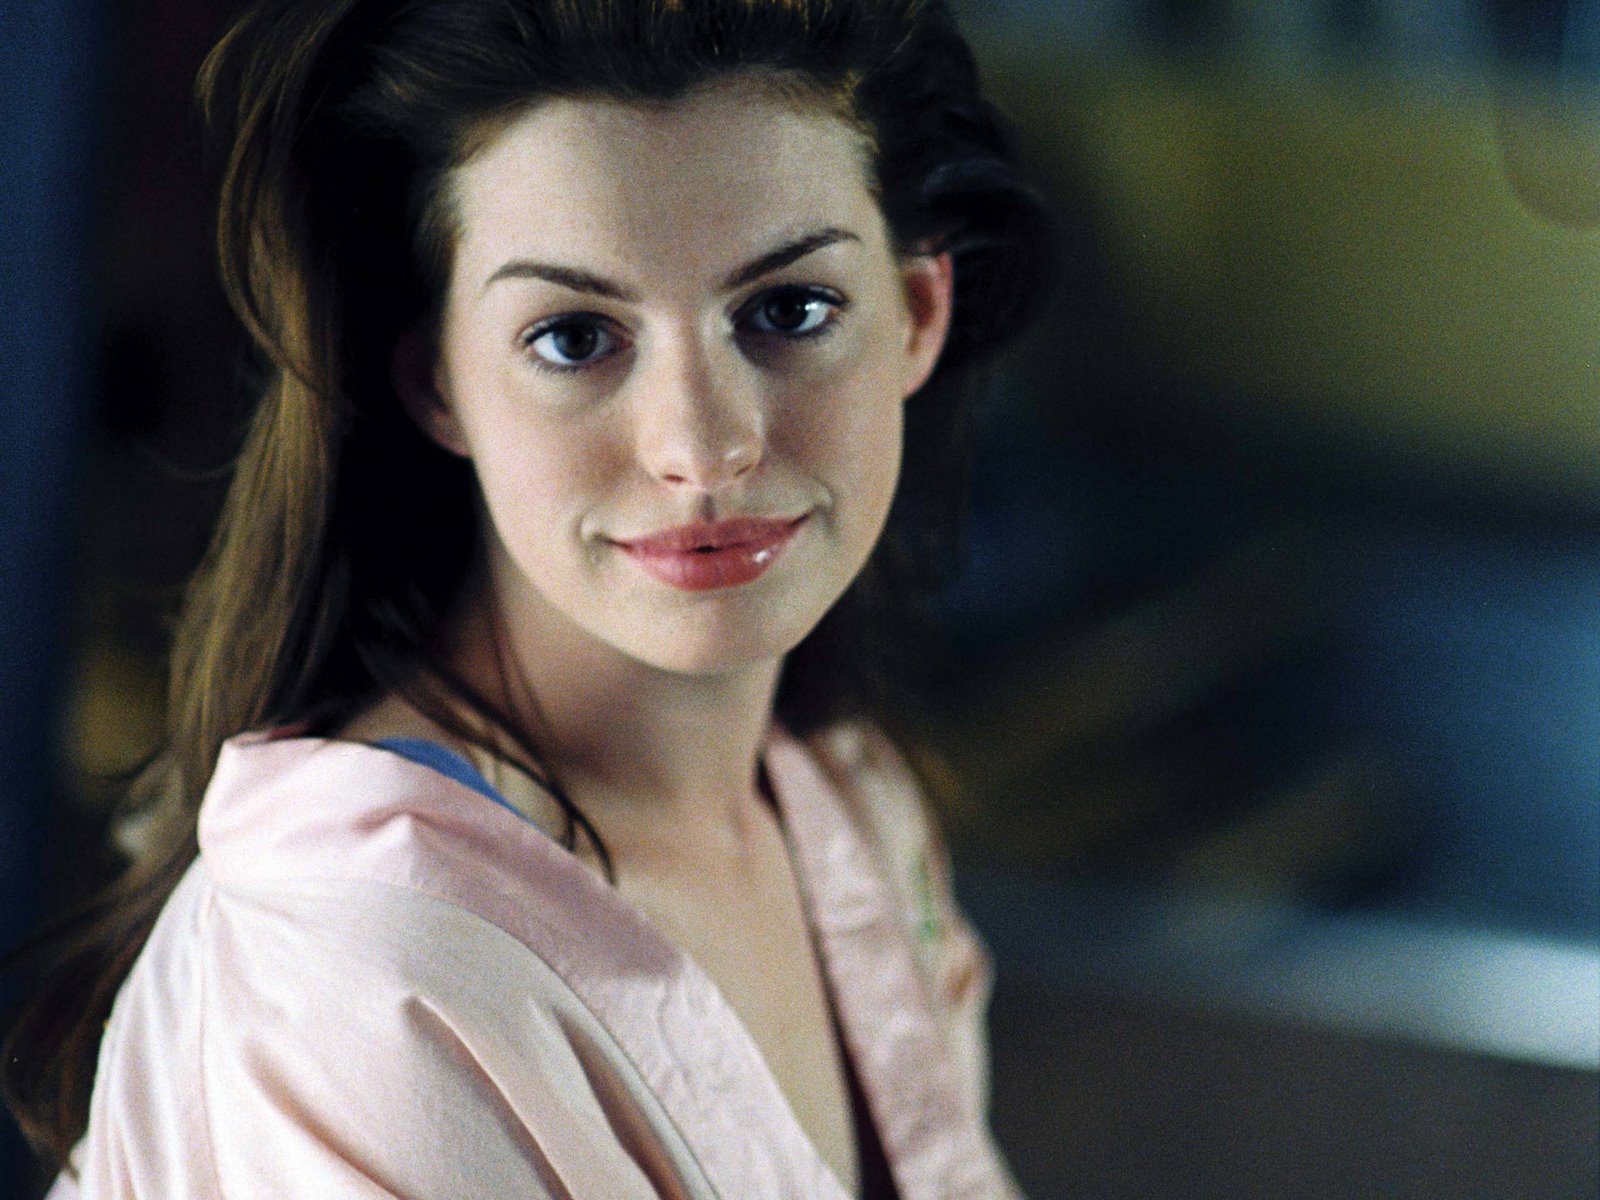 Free non watermarked wallpapers of Anne Hathaway at Fullwalls blogspot ...